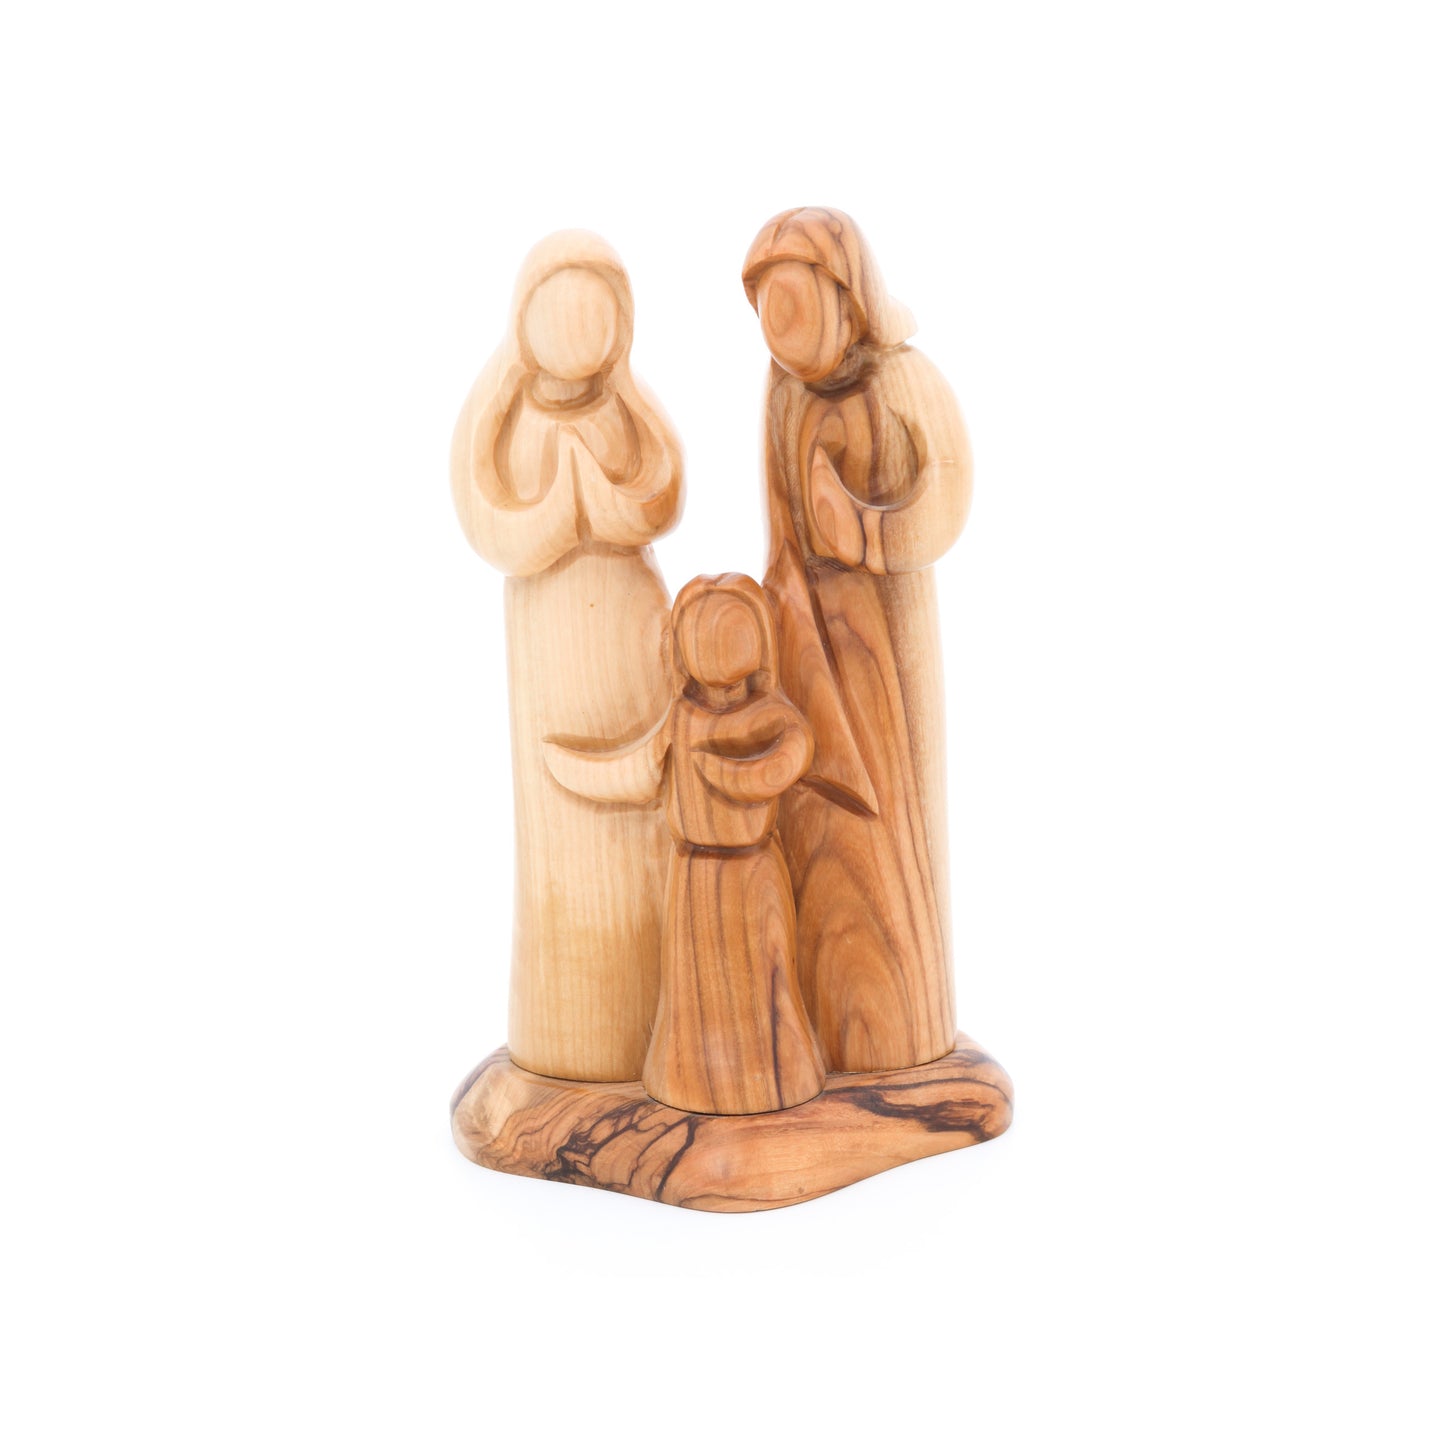 Jesus, Mary and Joseph Olive Wood Sculpture, 12.6" Abstract Hand Carved